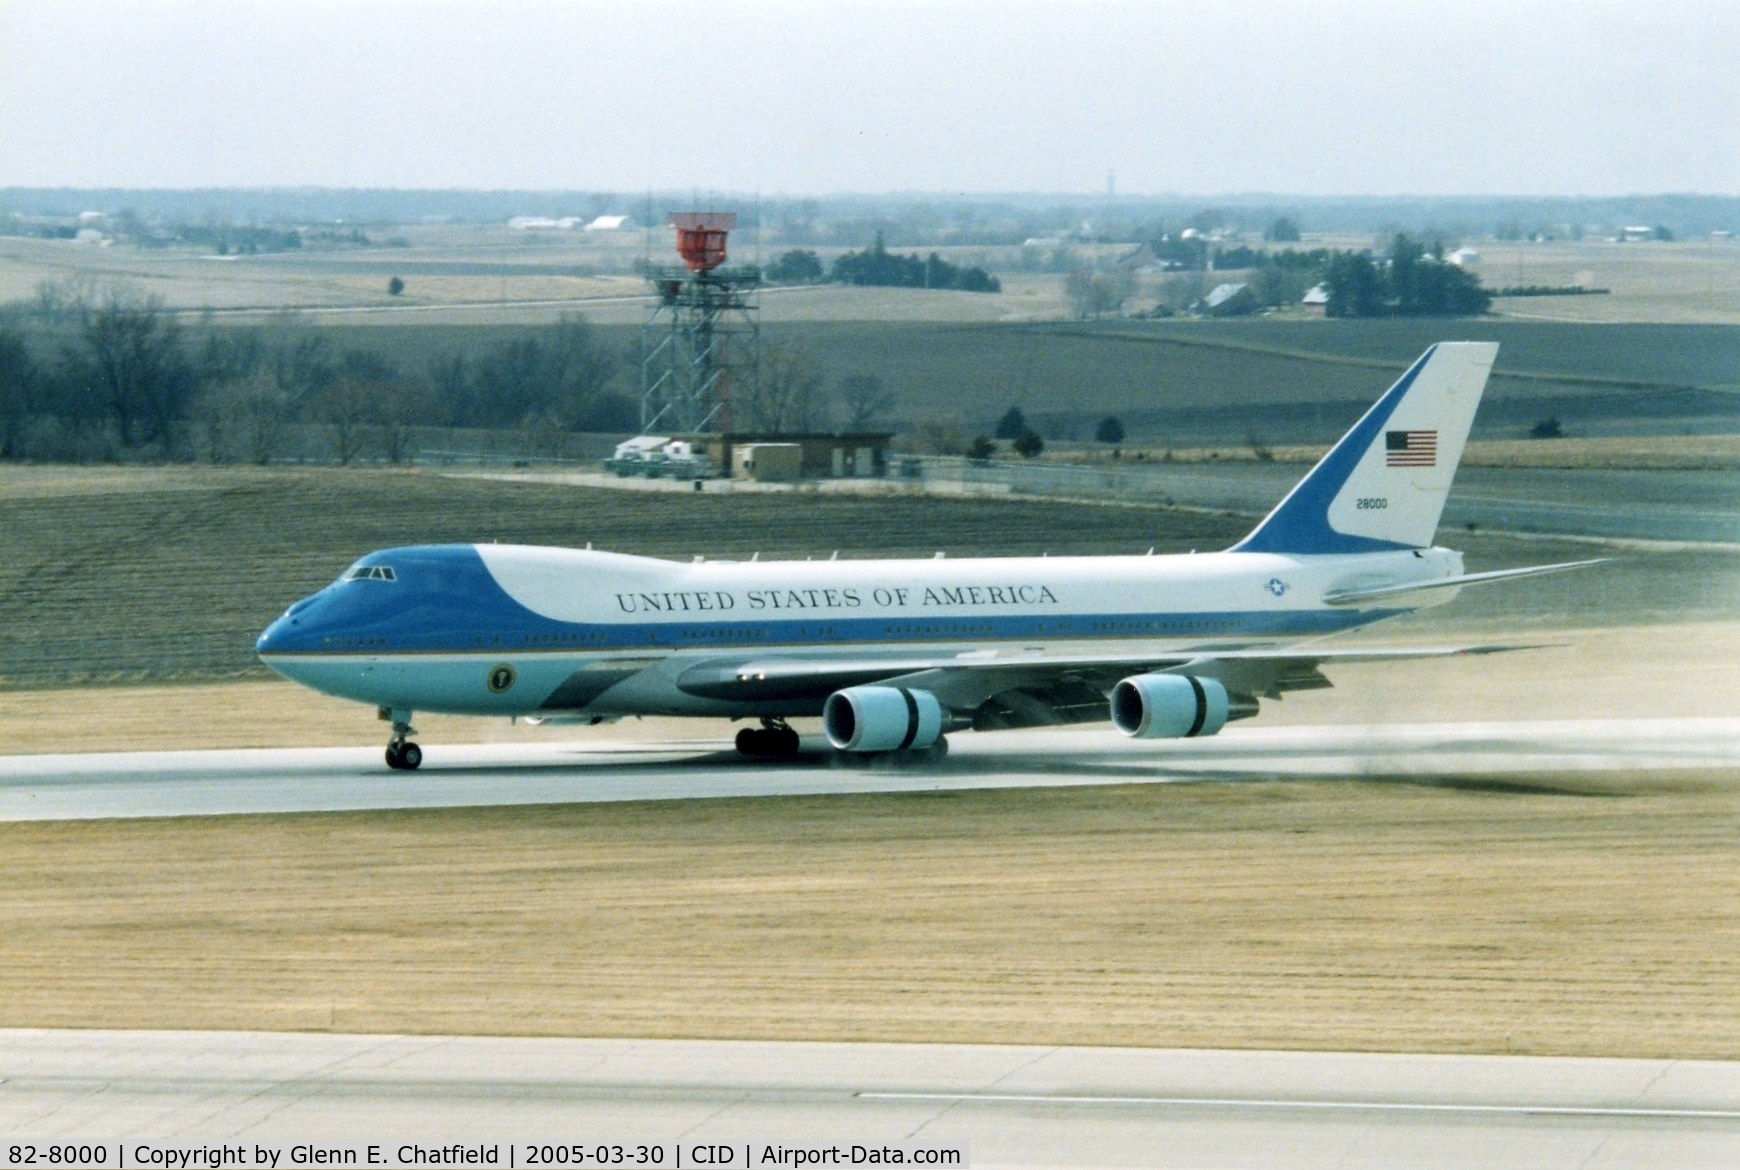 82-8000, 1987 Boeing VC-25A (747-2G4B) C/N 23824, VC-25A, Air Force One, arriving on Runway 9